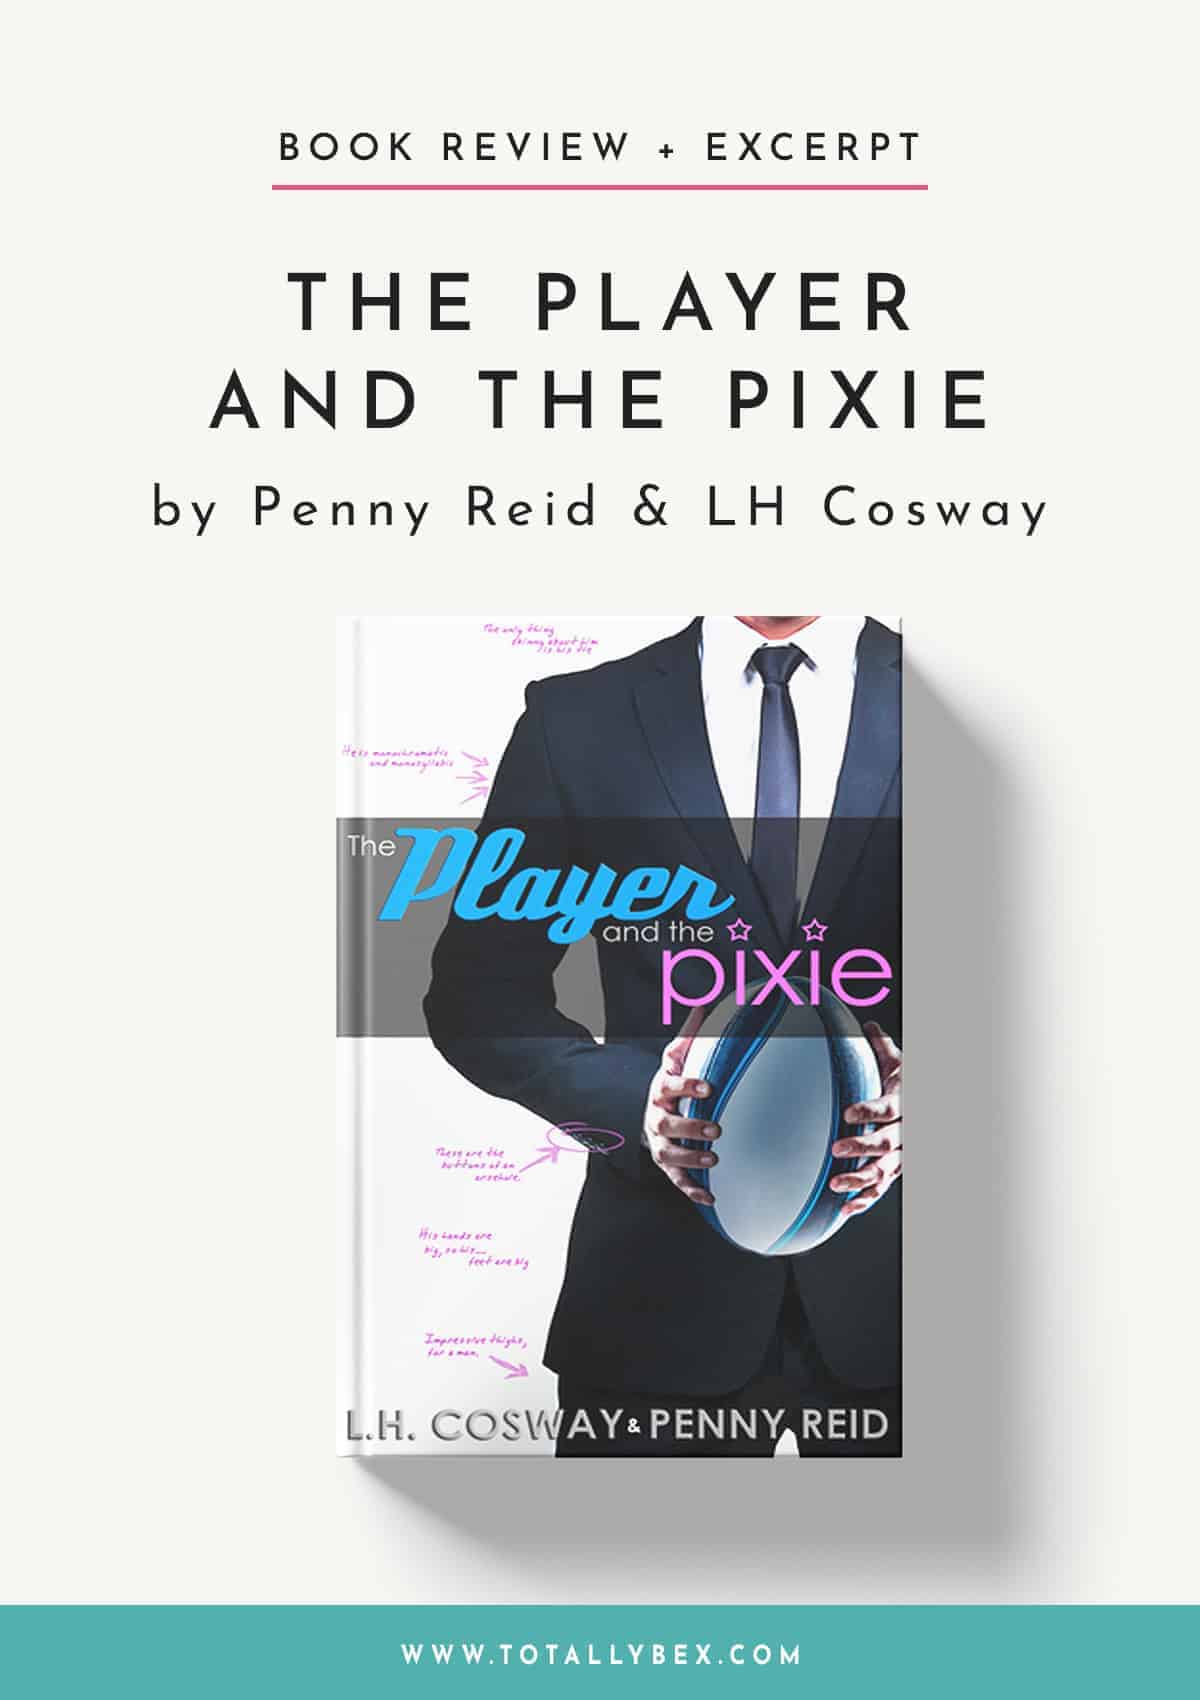 The Player and the Pixie by Penny Reid and LH Cosway – Unexpectedly Emotional!